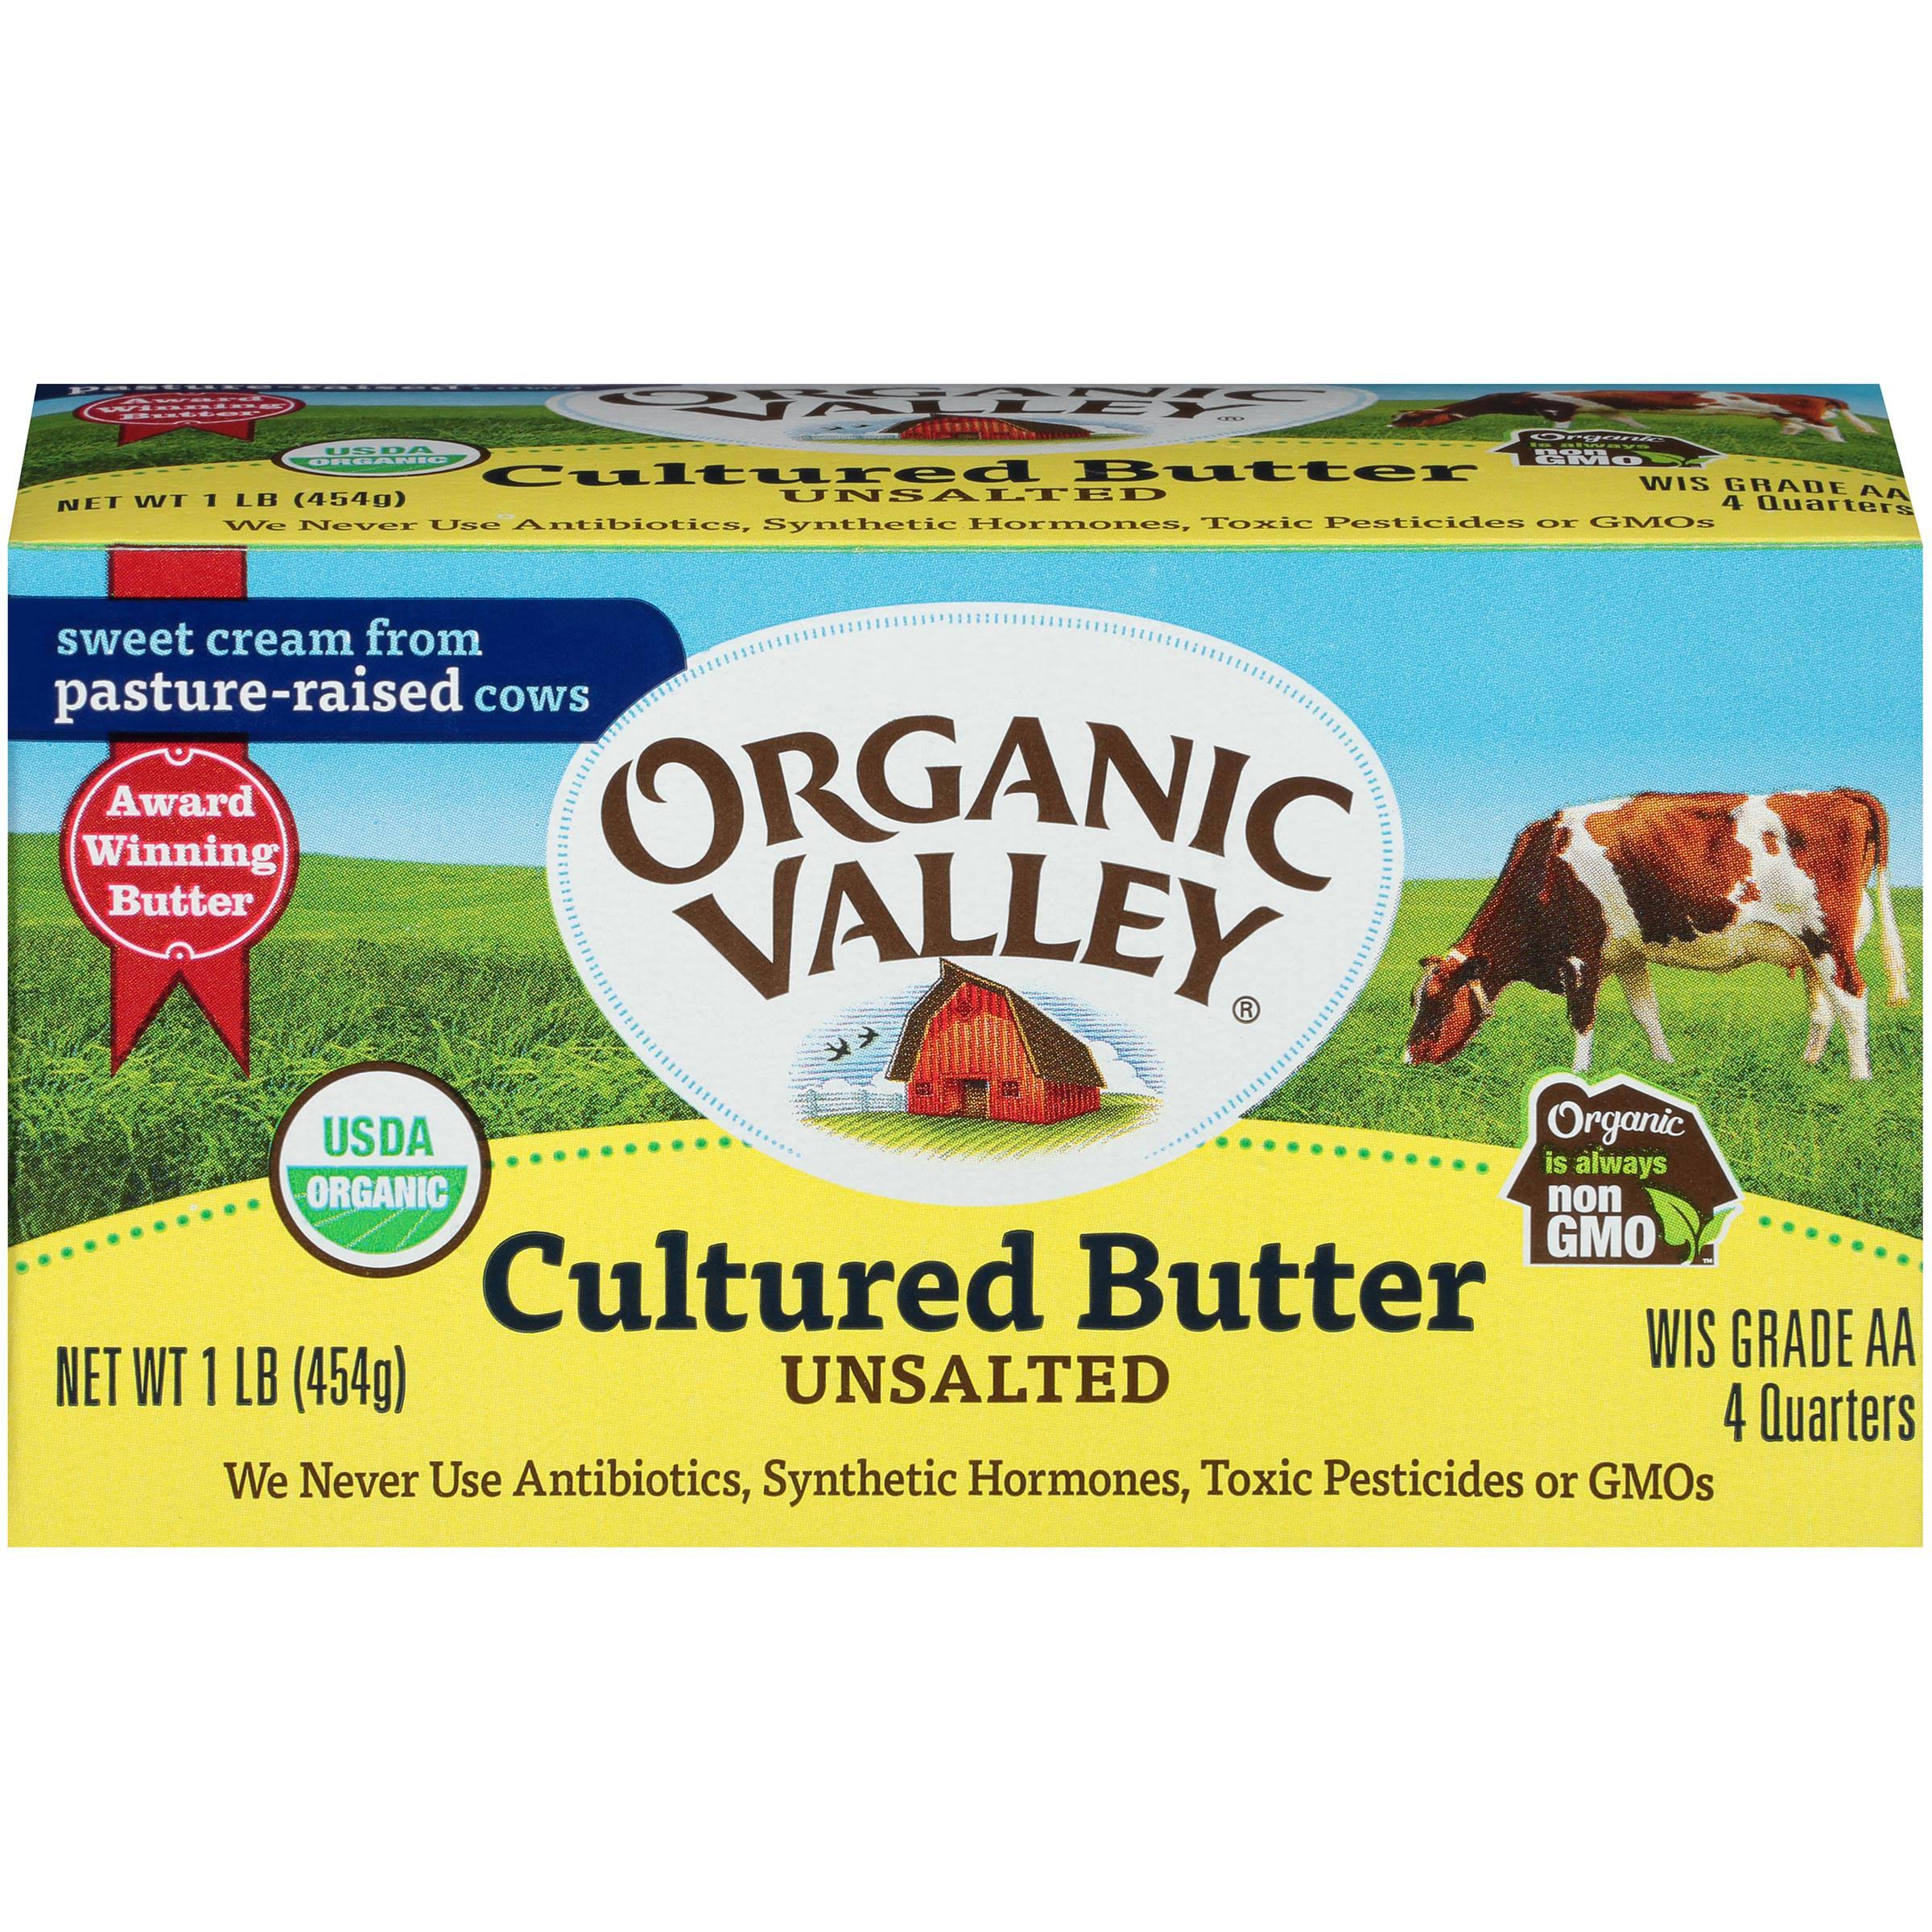 Organic Valley Butter, Cultured, Unsalted - 4 quarters, 1 lb